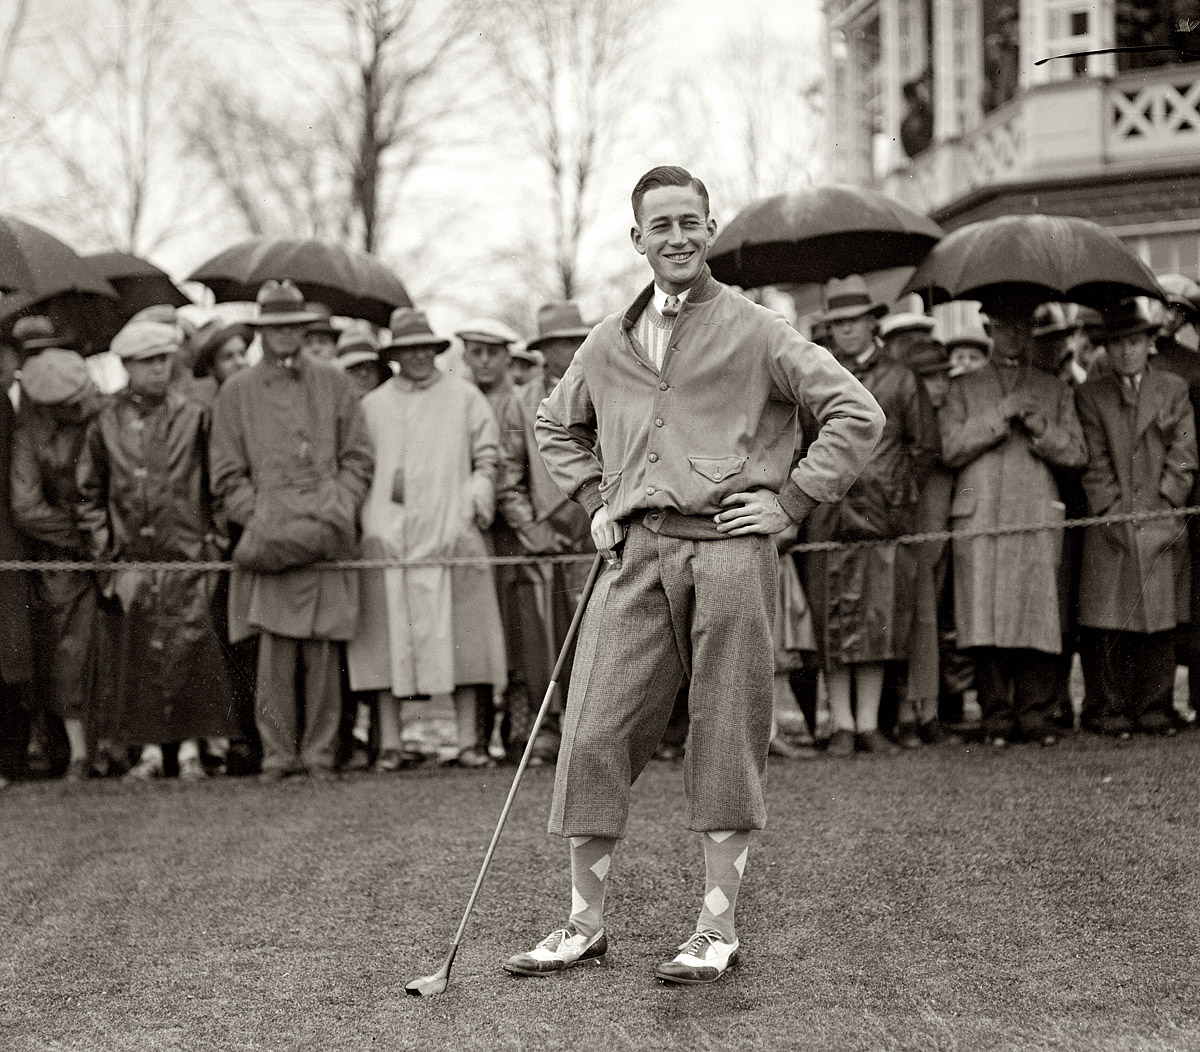 Golfer Phillips Finlay at the Chevy Chase Club in 1929. View full size. 4x5 inch glass negative from the National Photo Company Collection.